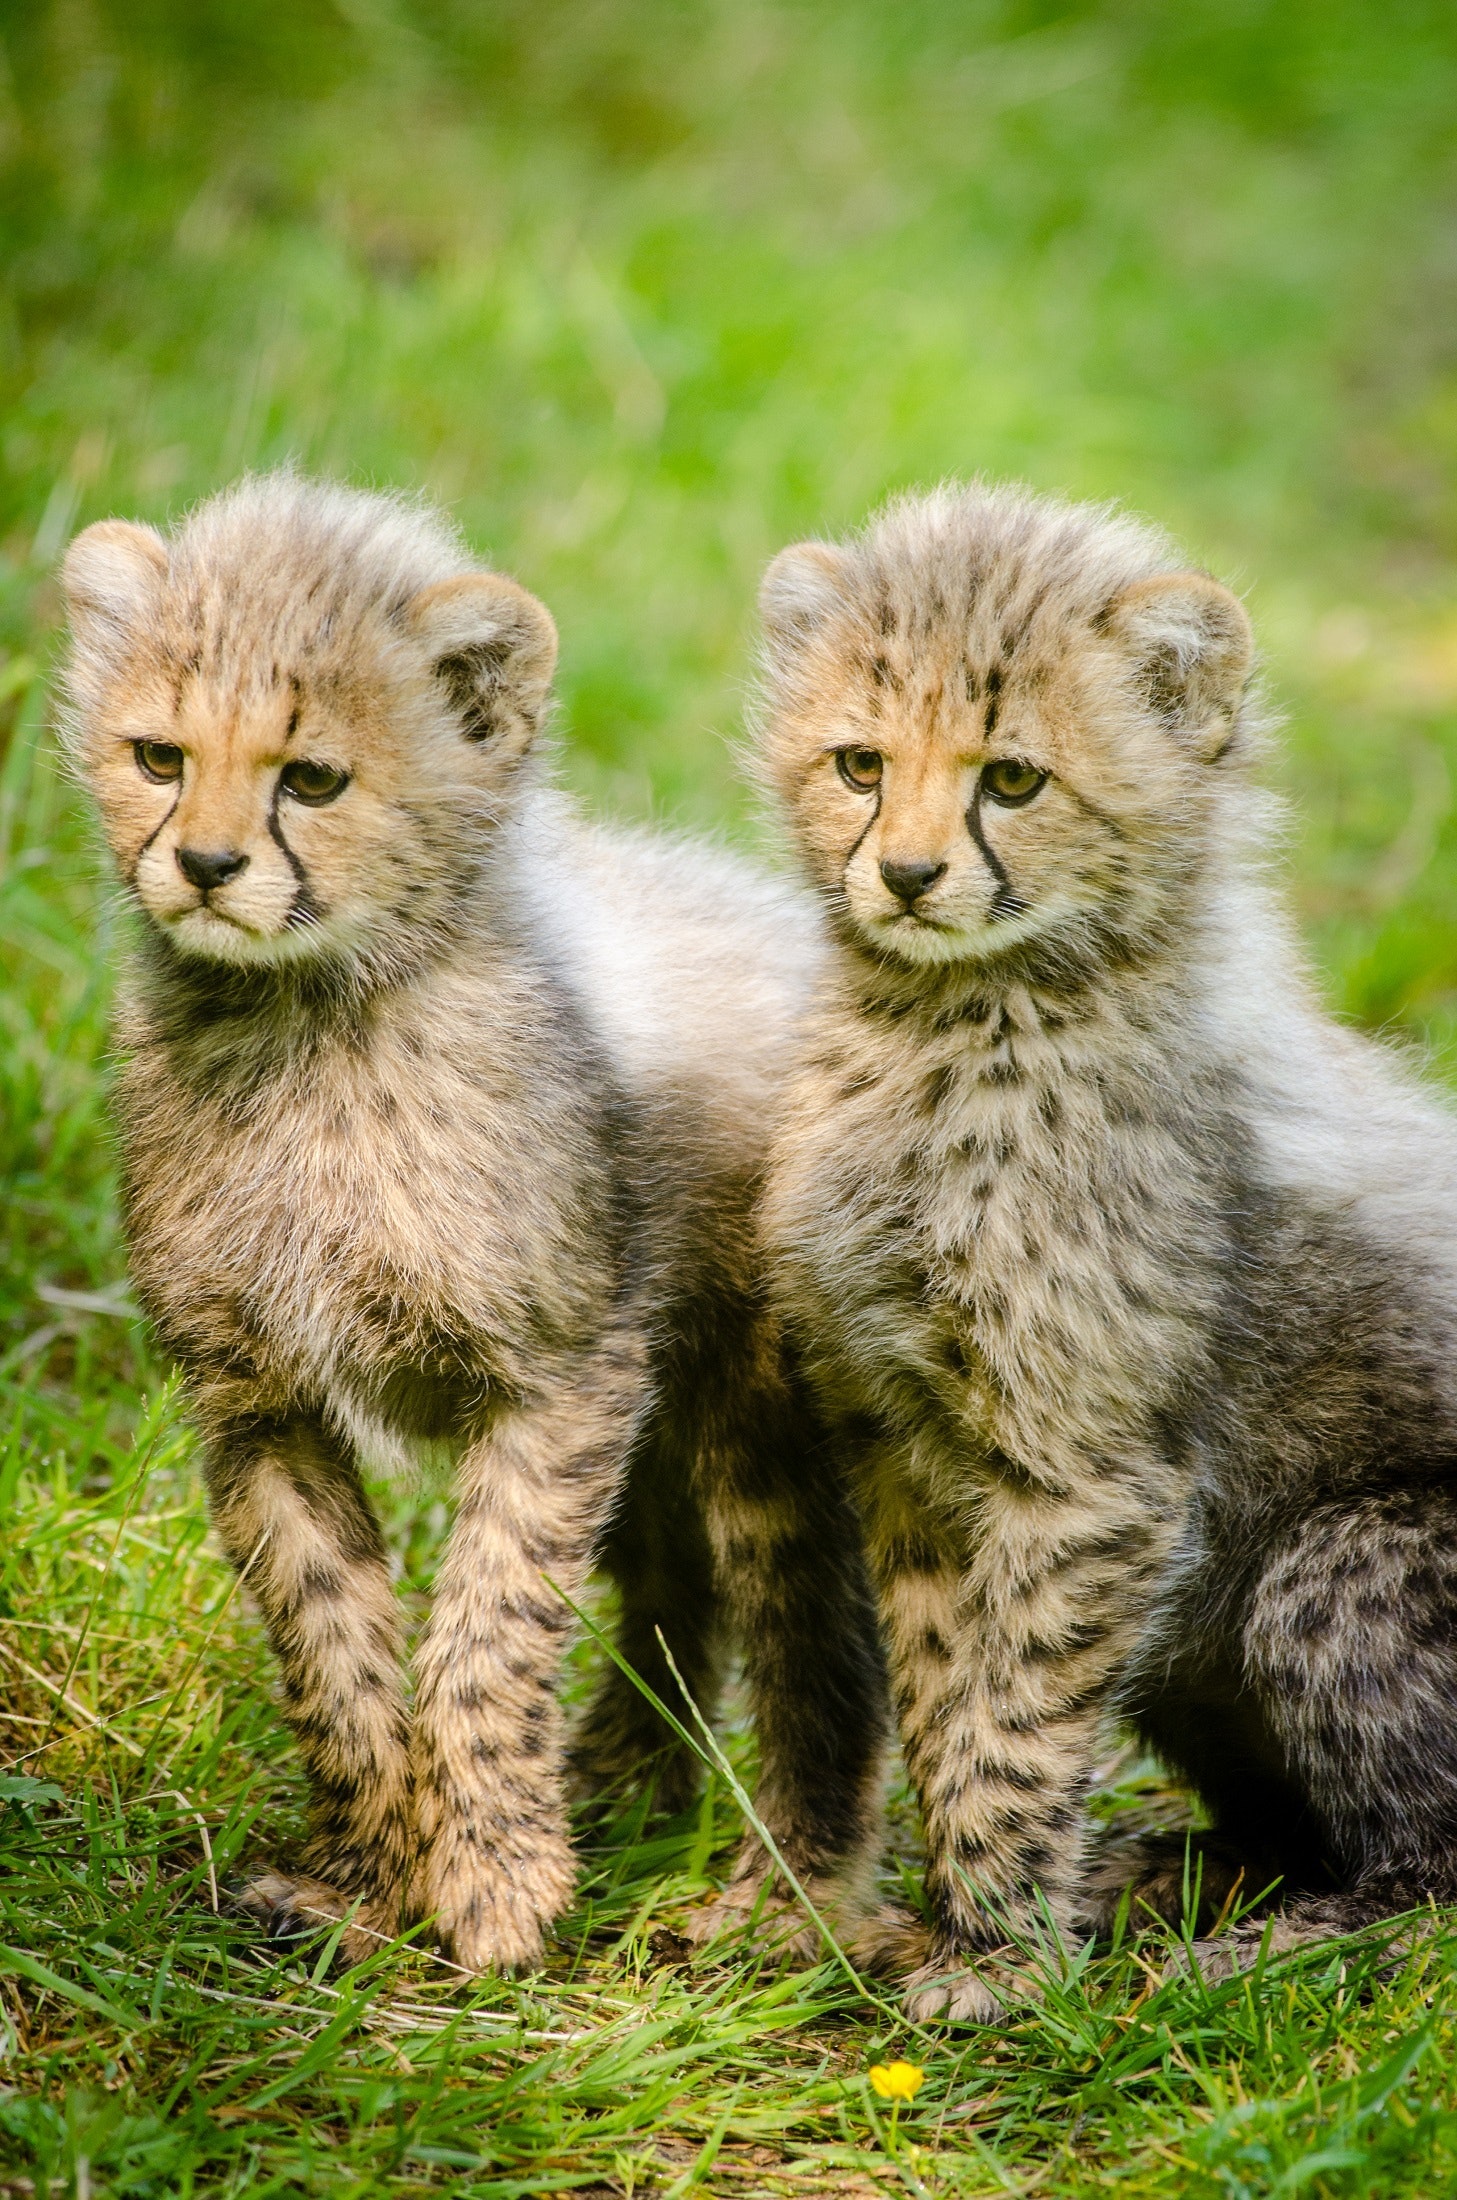 2 Yellow and Black Cheetah Sitting Together, Adorable, Fur, Wilderness, Wild animals, HQ Photo